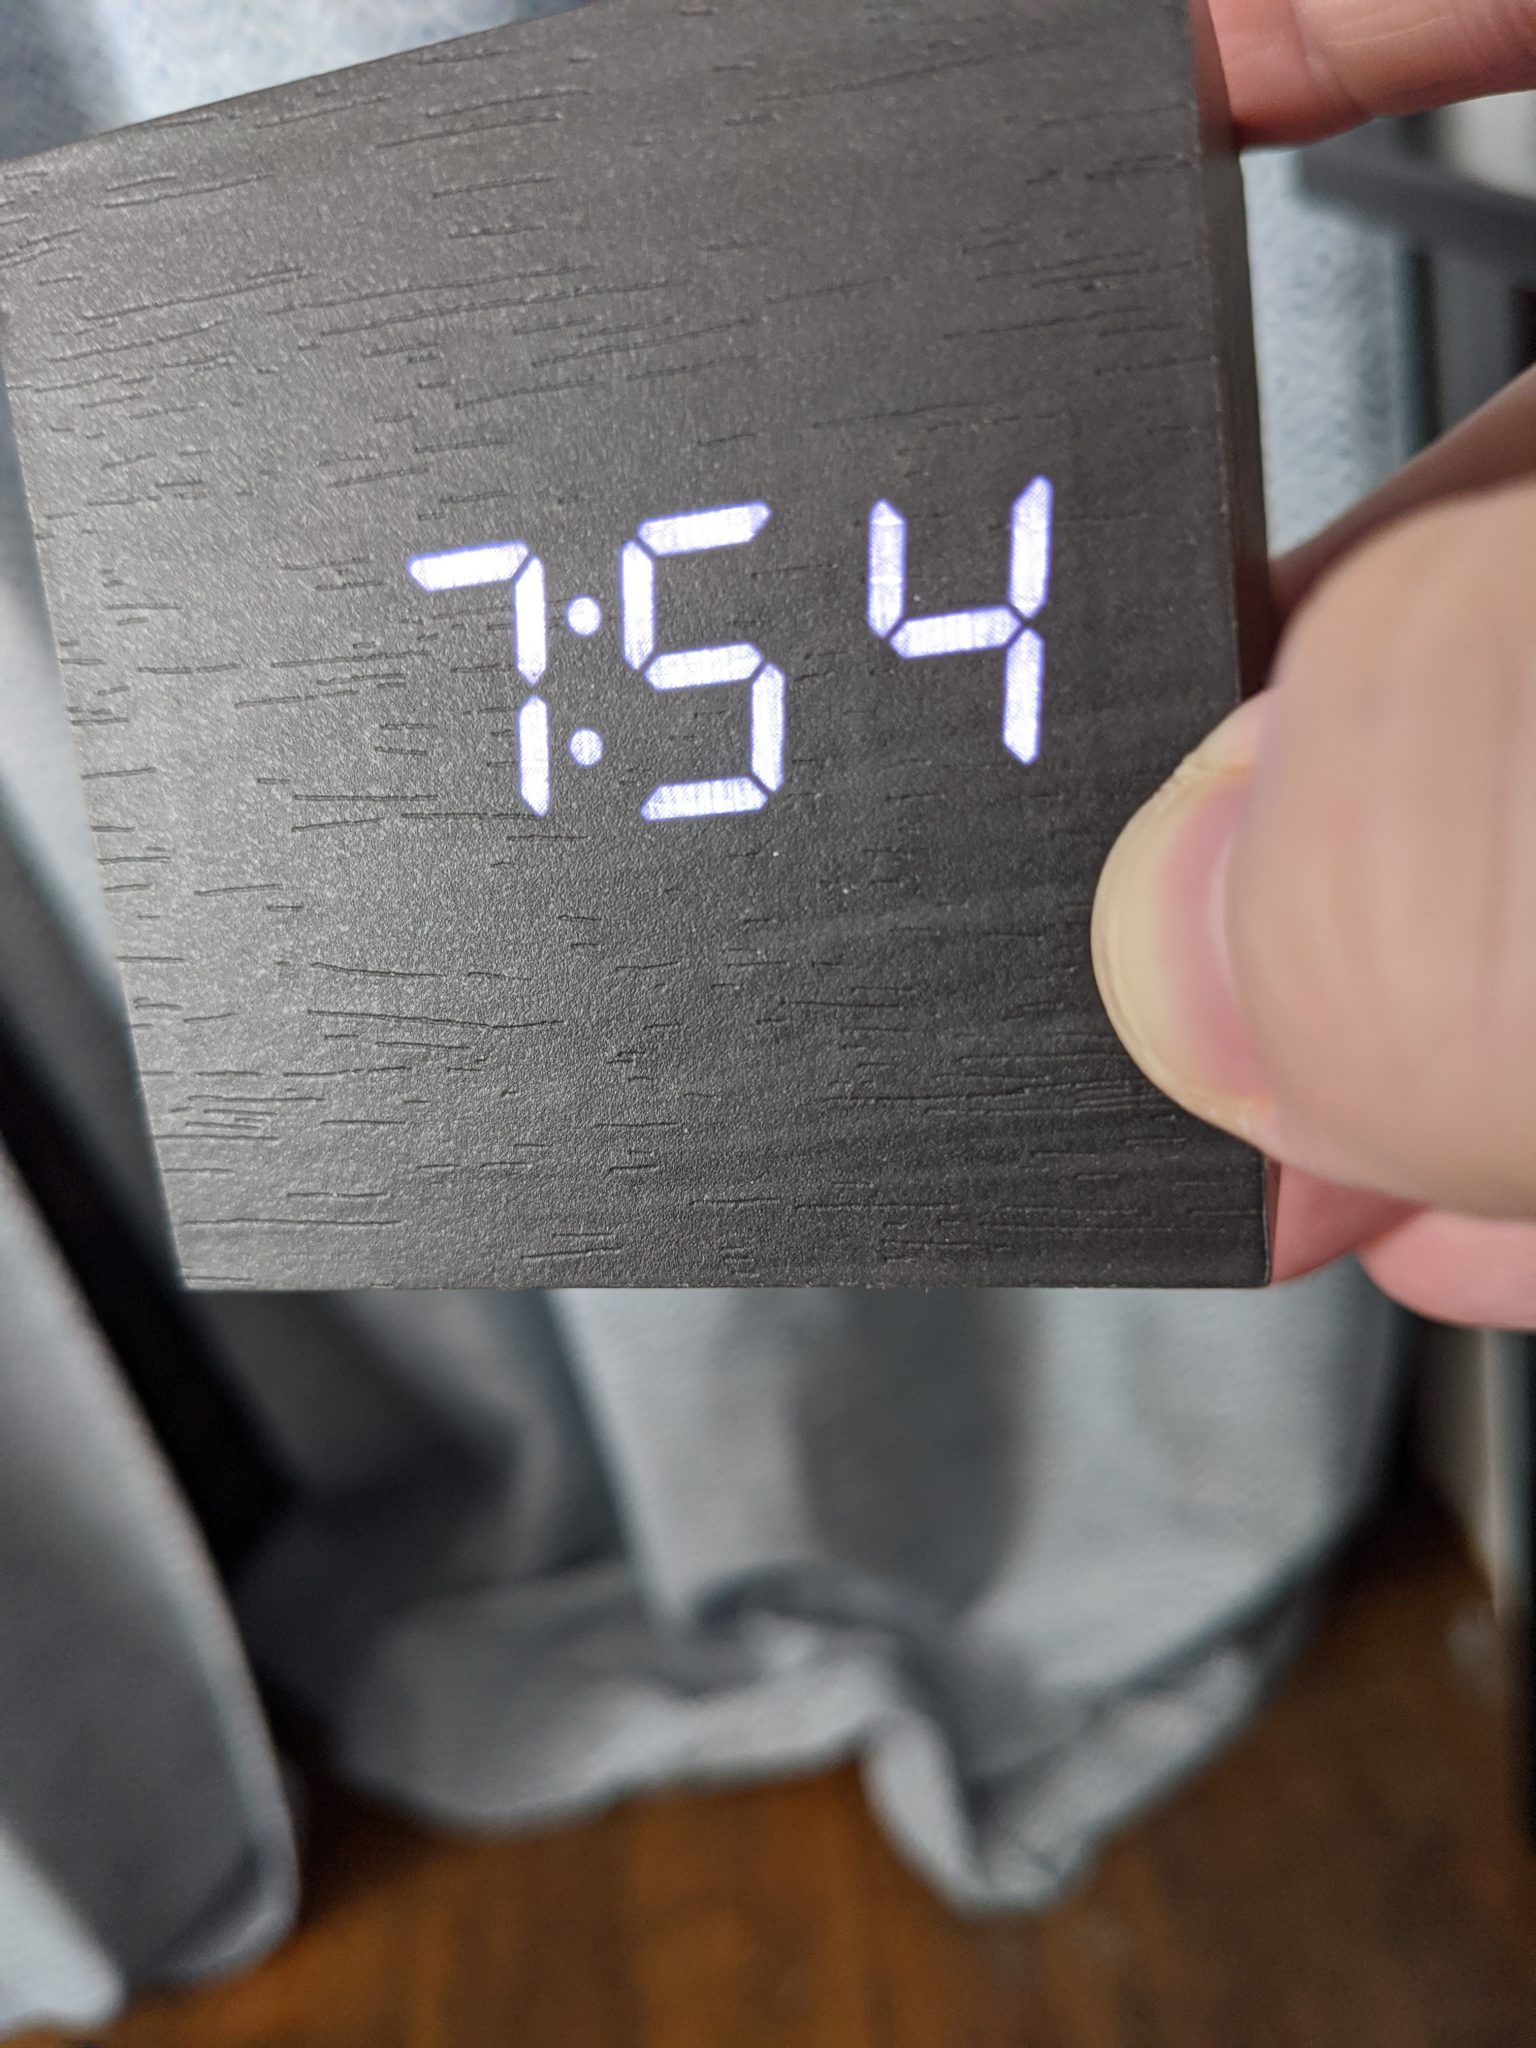 A square digital clock, held in someone's hand. It is 7:54